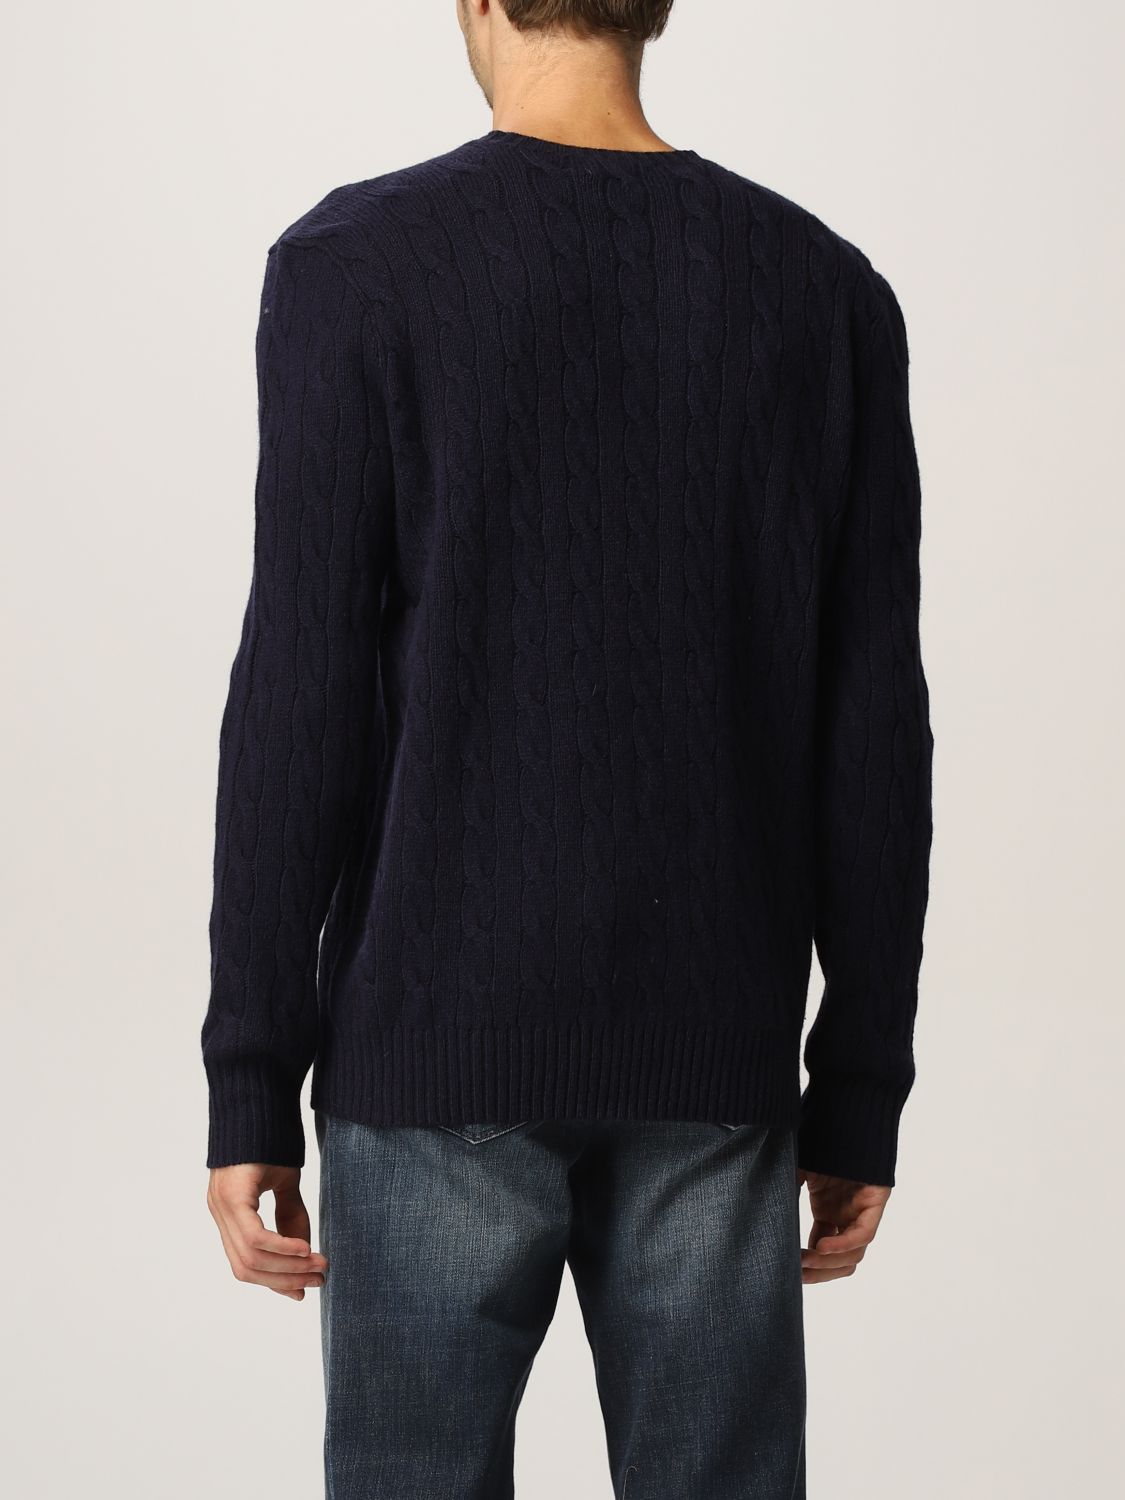 Jumper Polo Ralph Lauren: Polo Ralph Lauren jumper in cable-knit cashmere navy 2